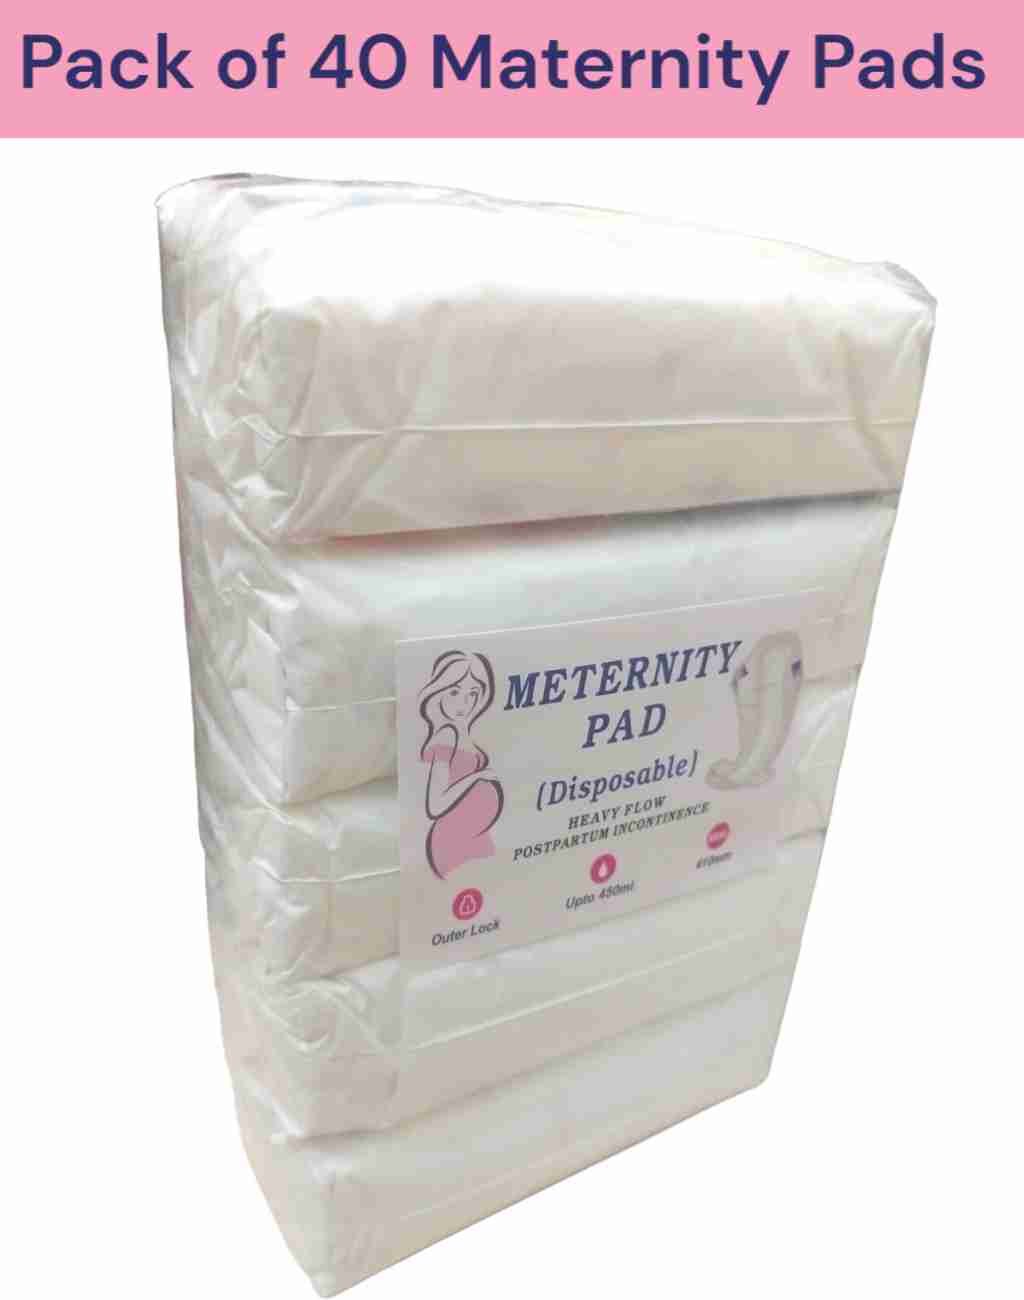 LADY HAWK 9+1 Post Partum Kit, 9 New Mom Disposable Maternity Pads